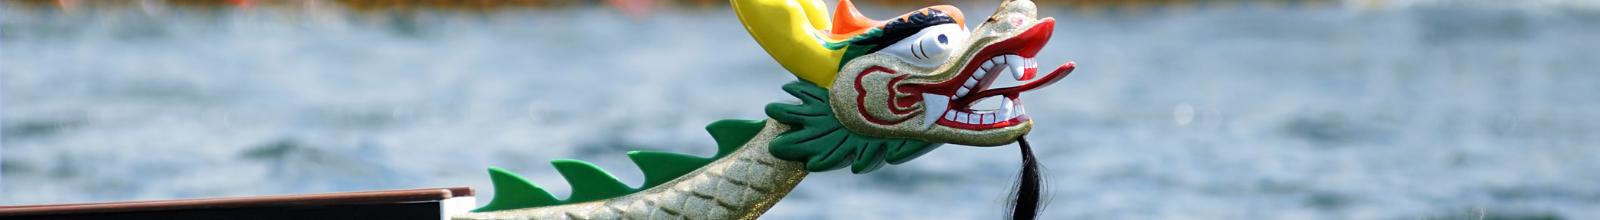 Head of a dragon boat on a body of water